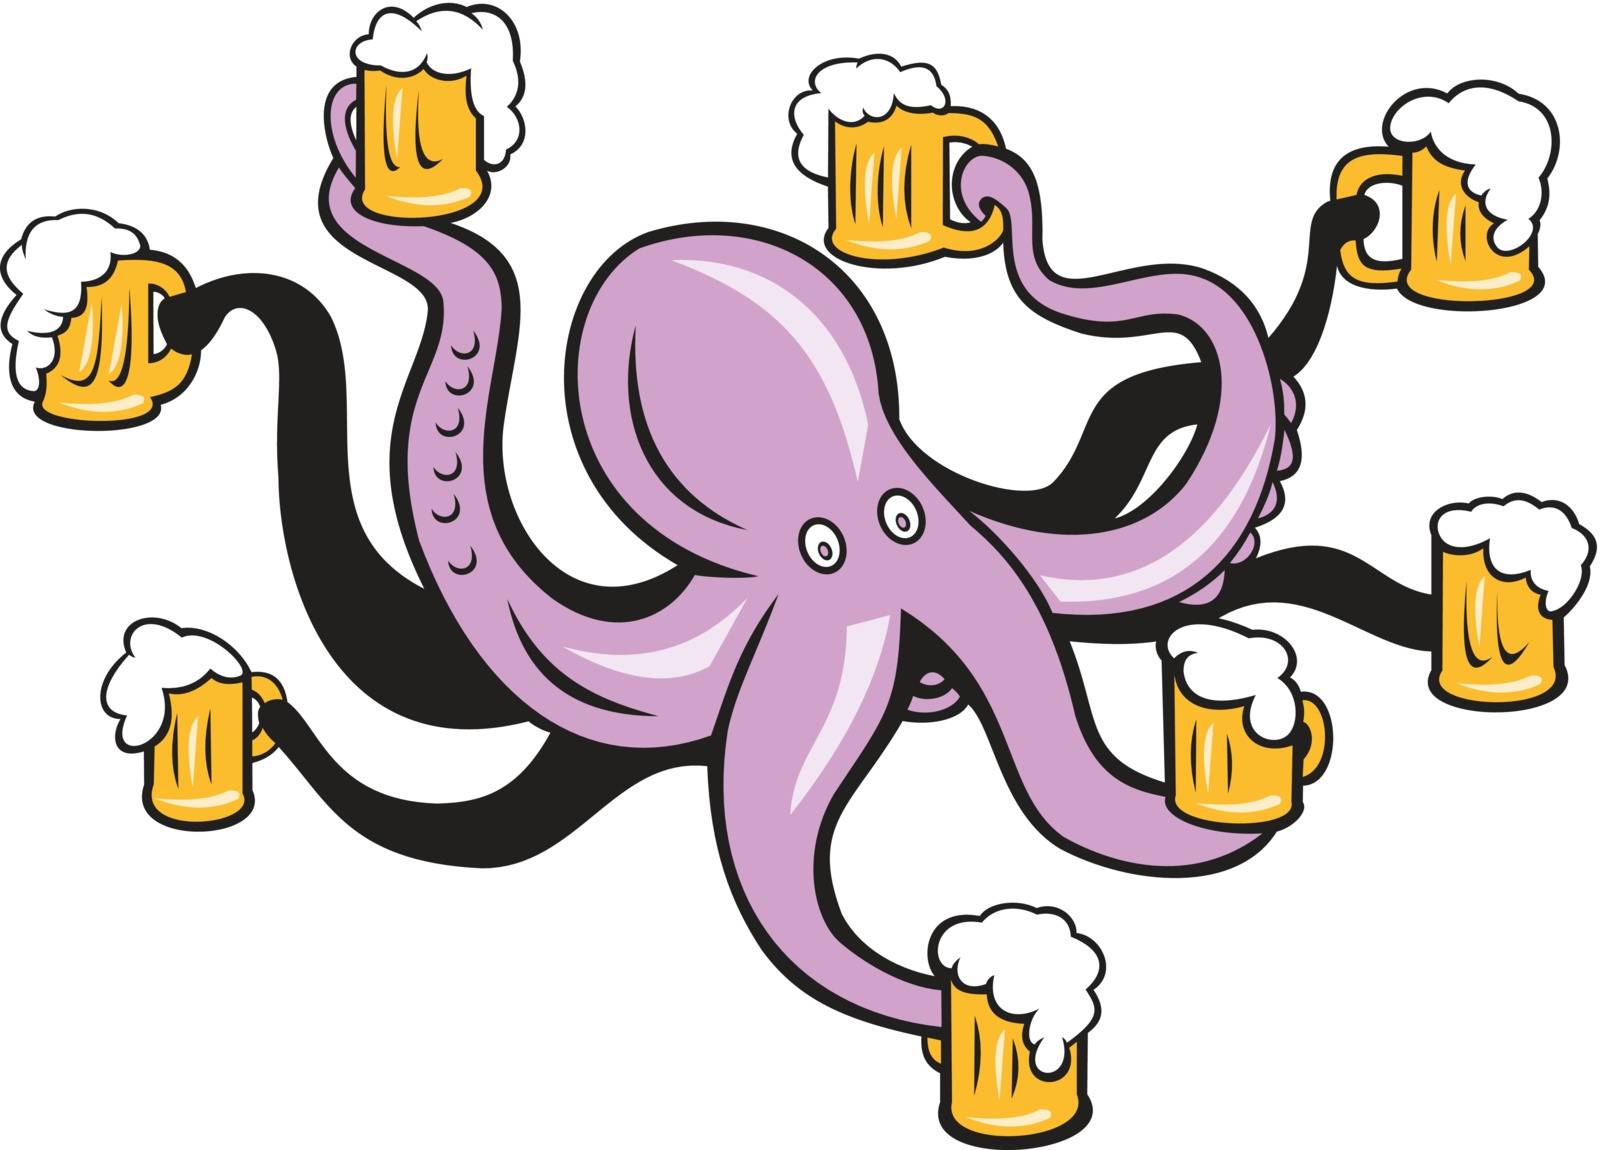 Octopus Holding Mug of Beer Tentacles  by patrimonio